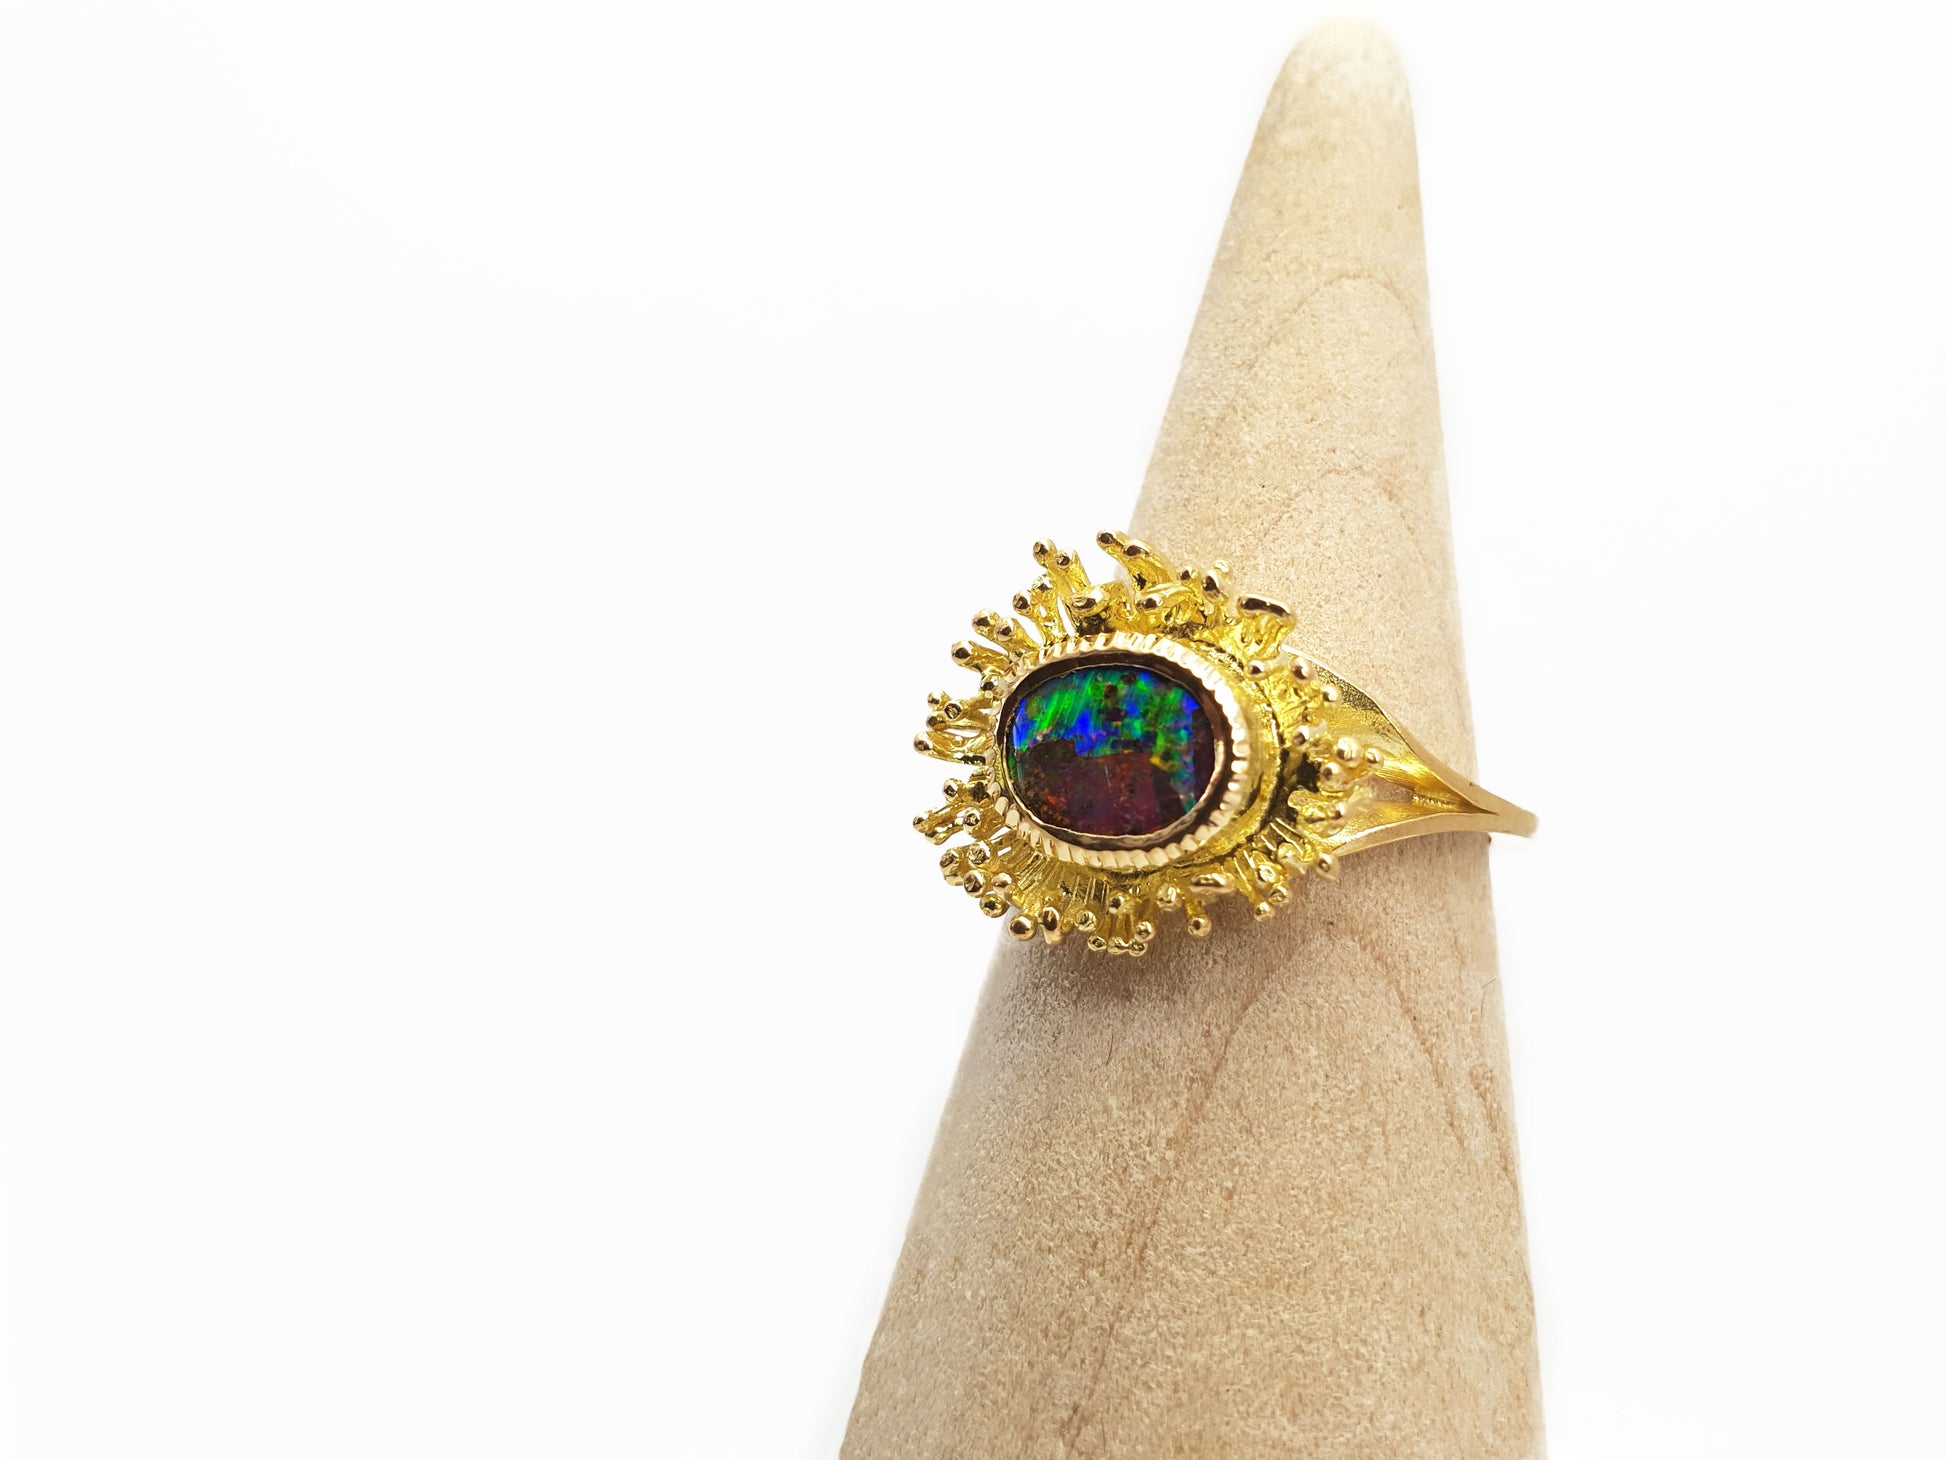 Gold fringe ring with Queensland Boulder Opal. Our products are all made with ethically sourced materials and handcrafted in our Brisbane based studio. Australian made and designed for high quality fine fashion